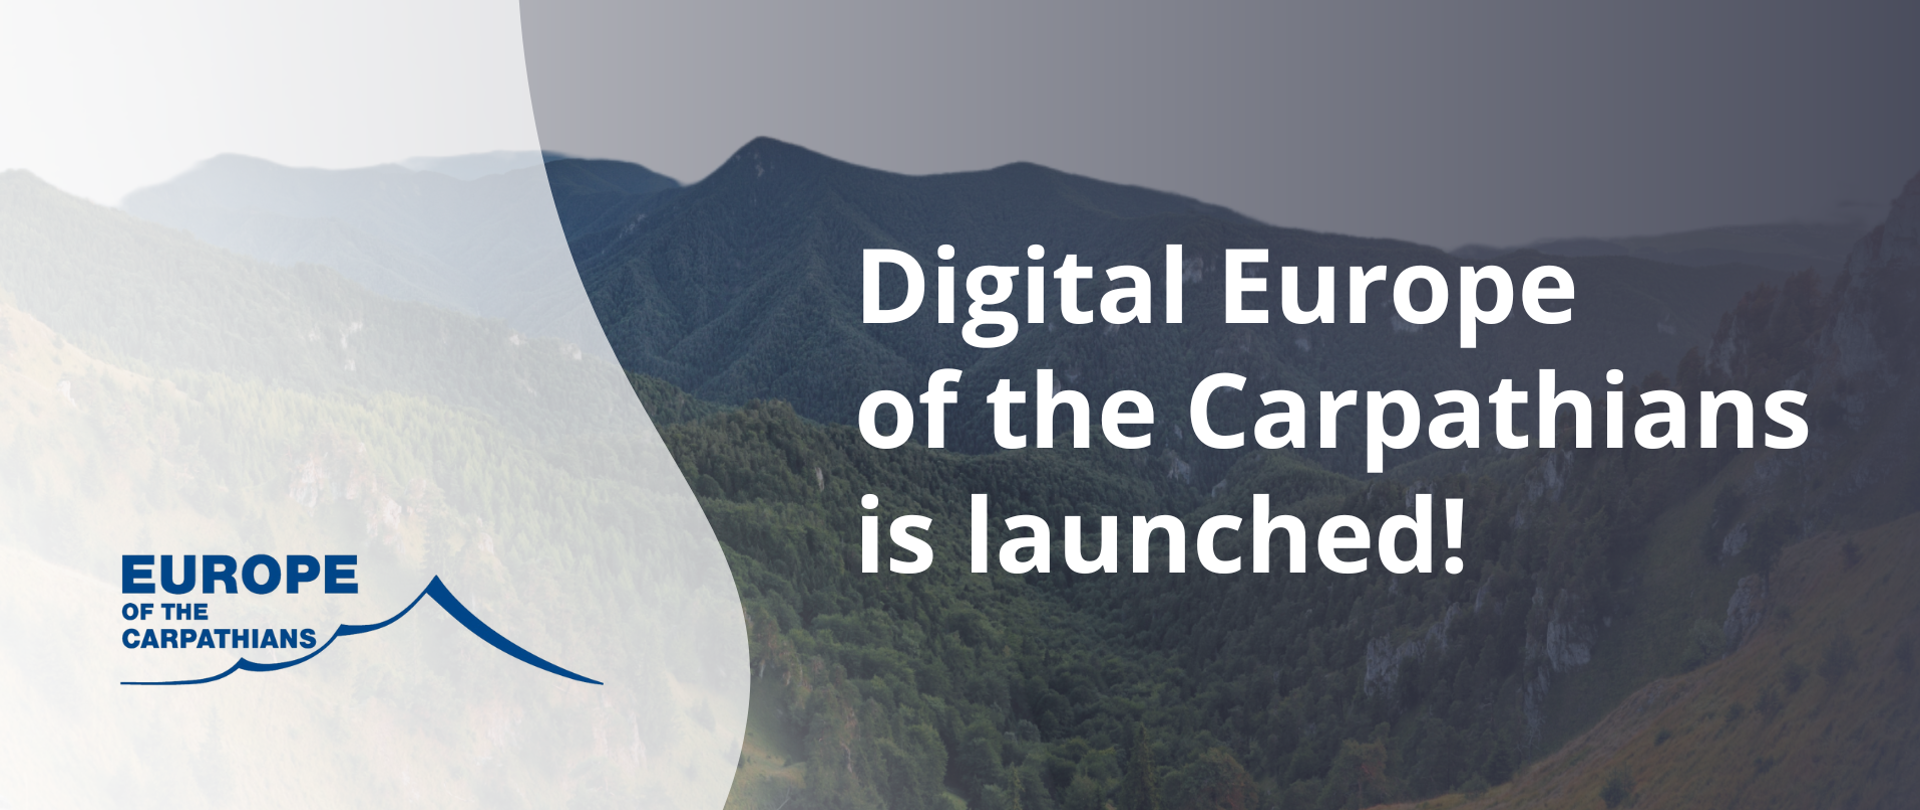 Title: Digital Europe of the Carpathians is launched!
